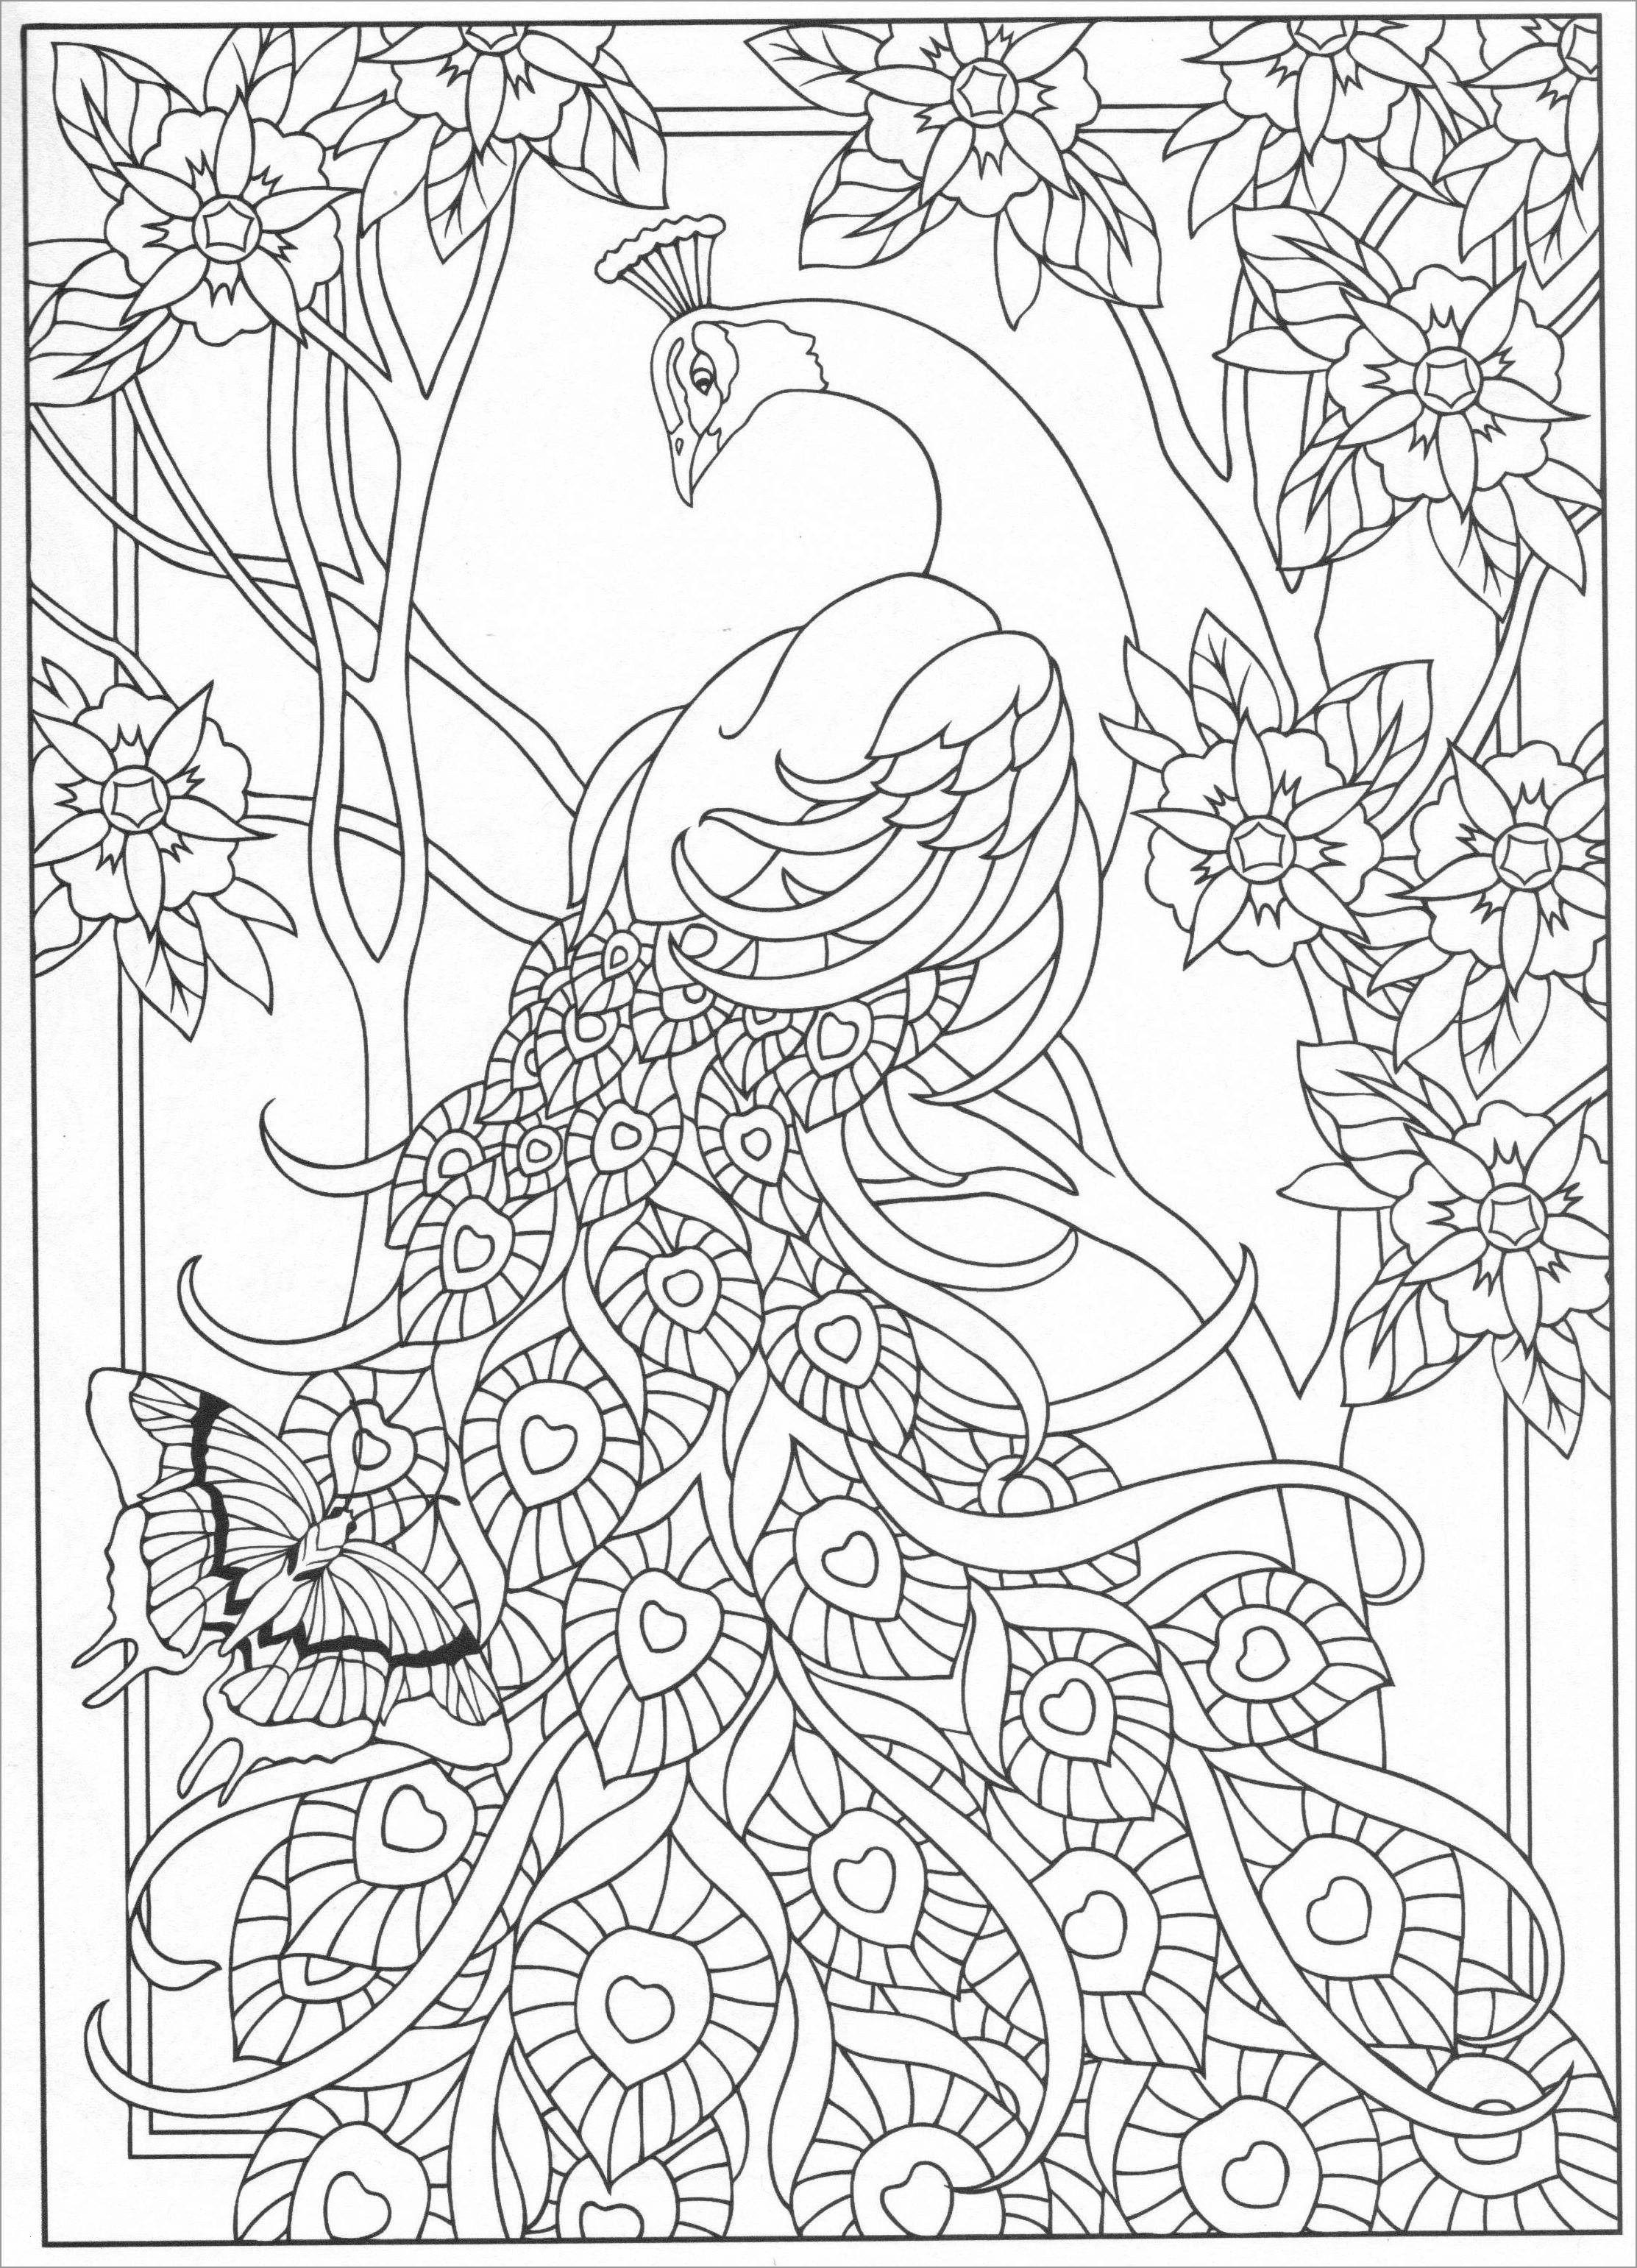 Peacock Coloring Pages for Adults